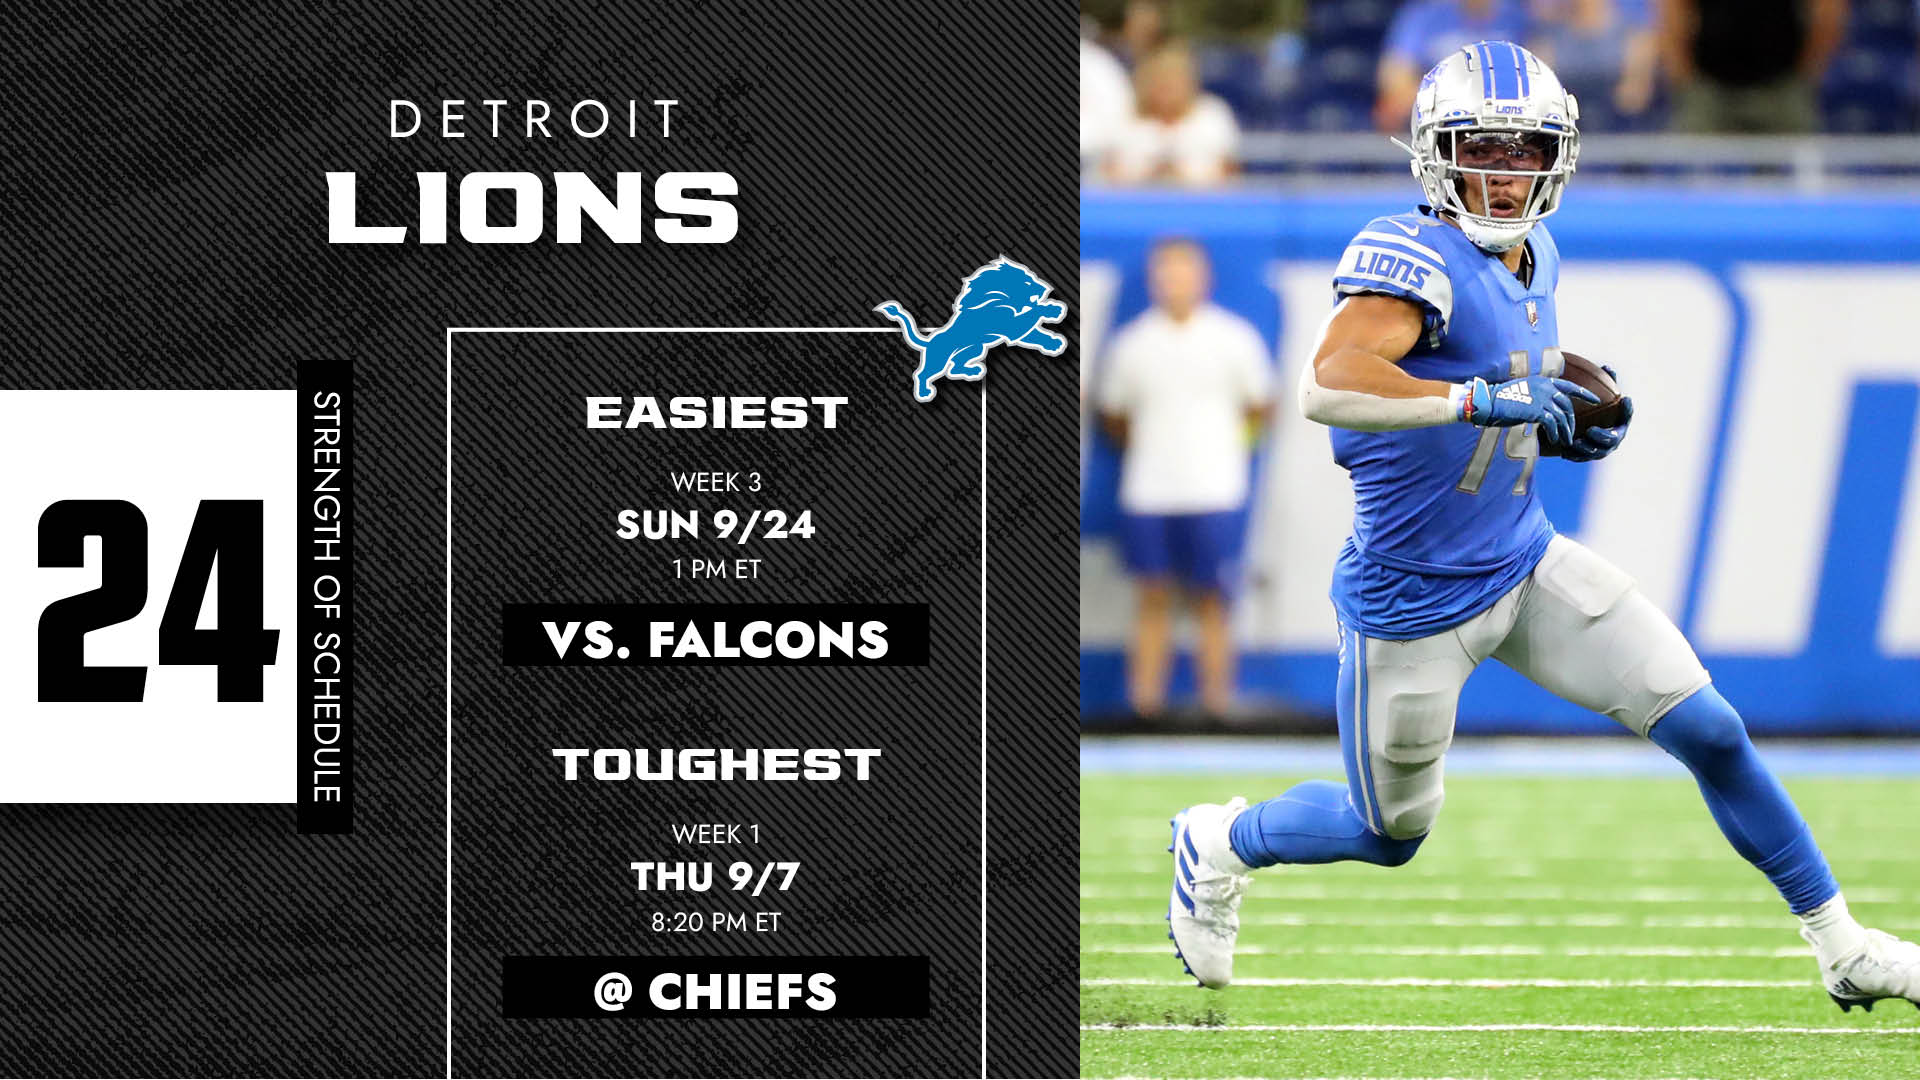 the lions schedule